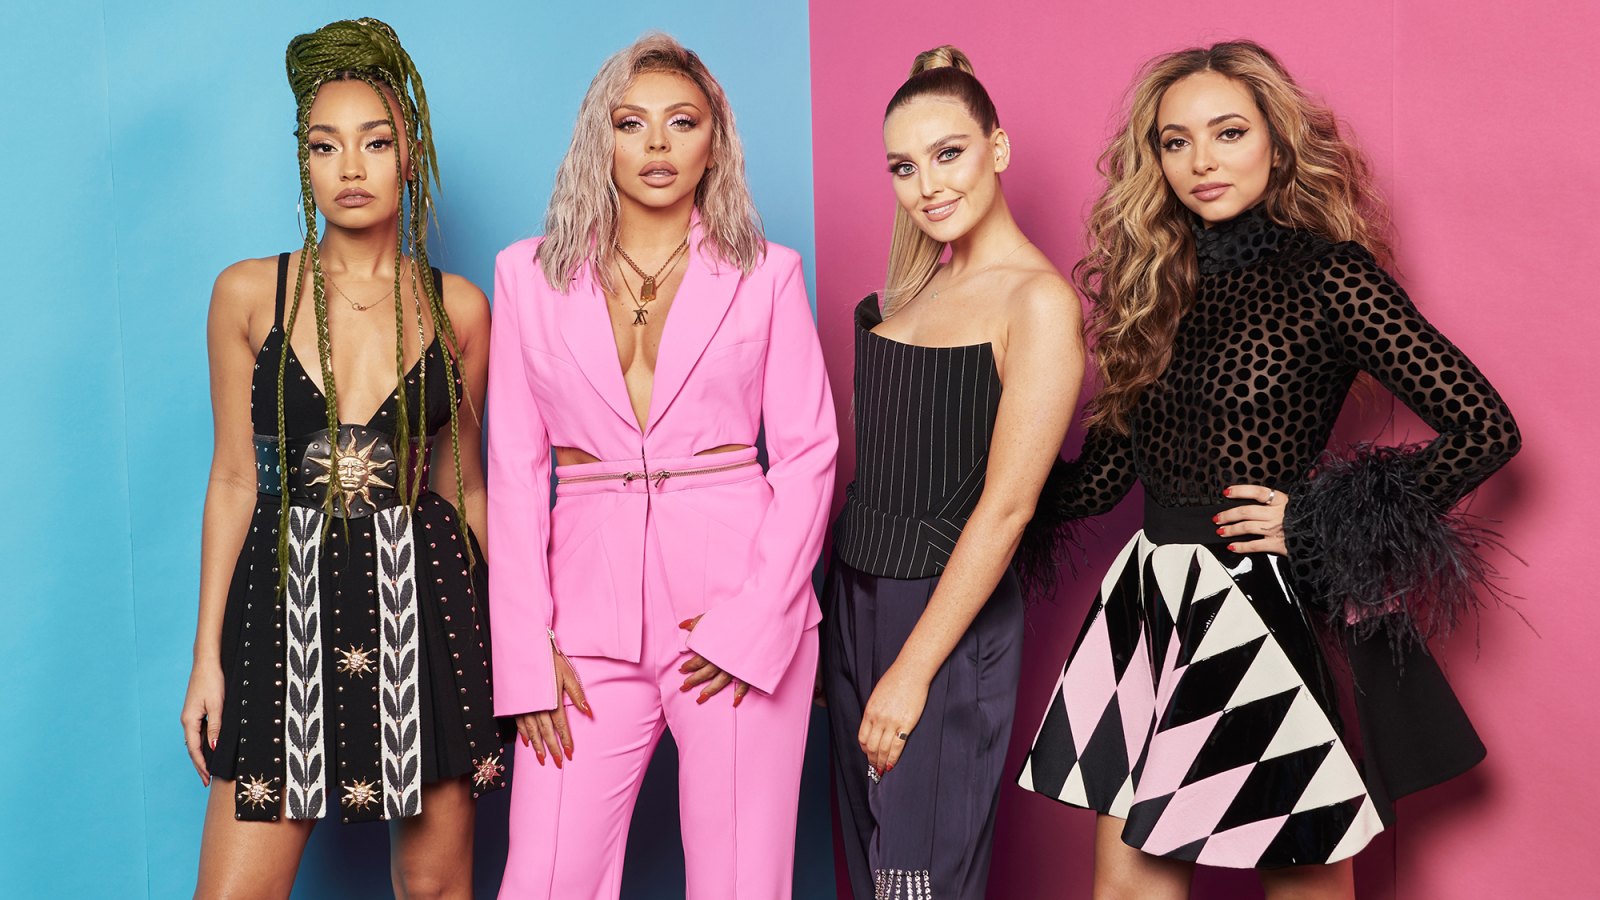 Mix's Jade Thirlwall on Why They're 'Stronger Than